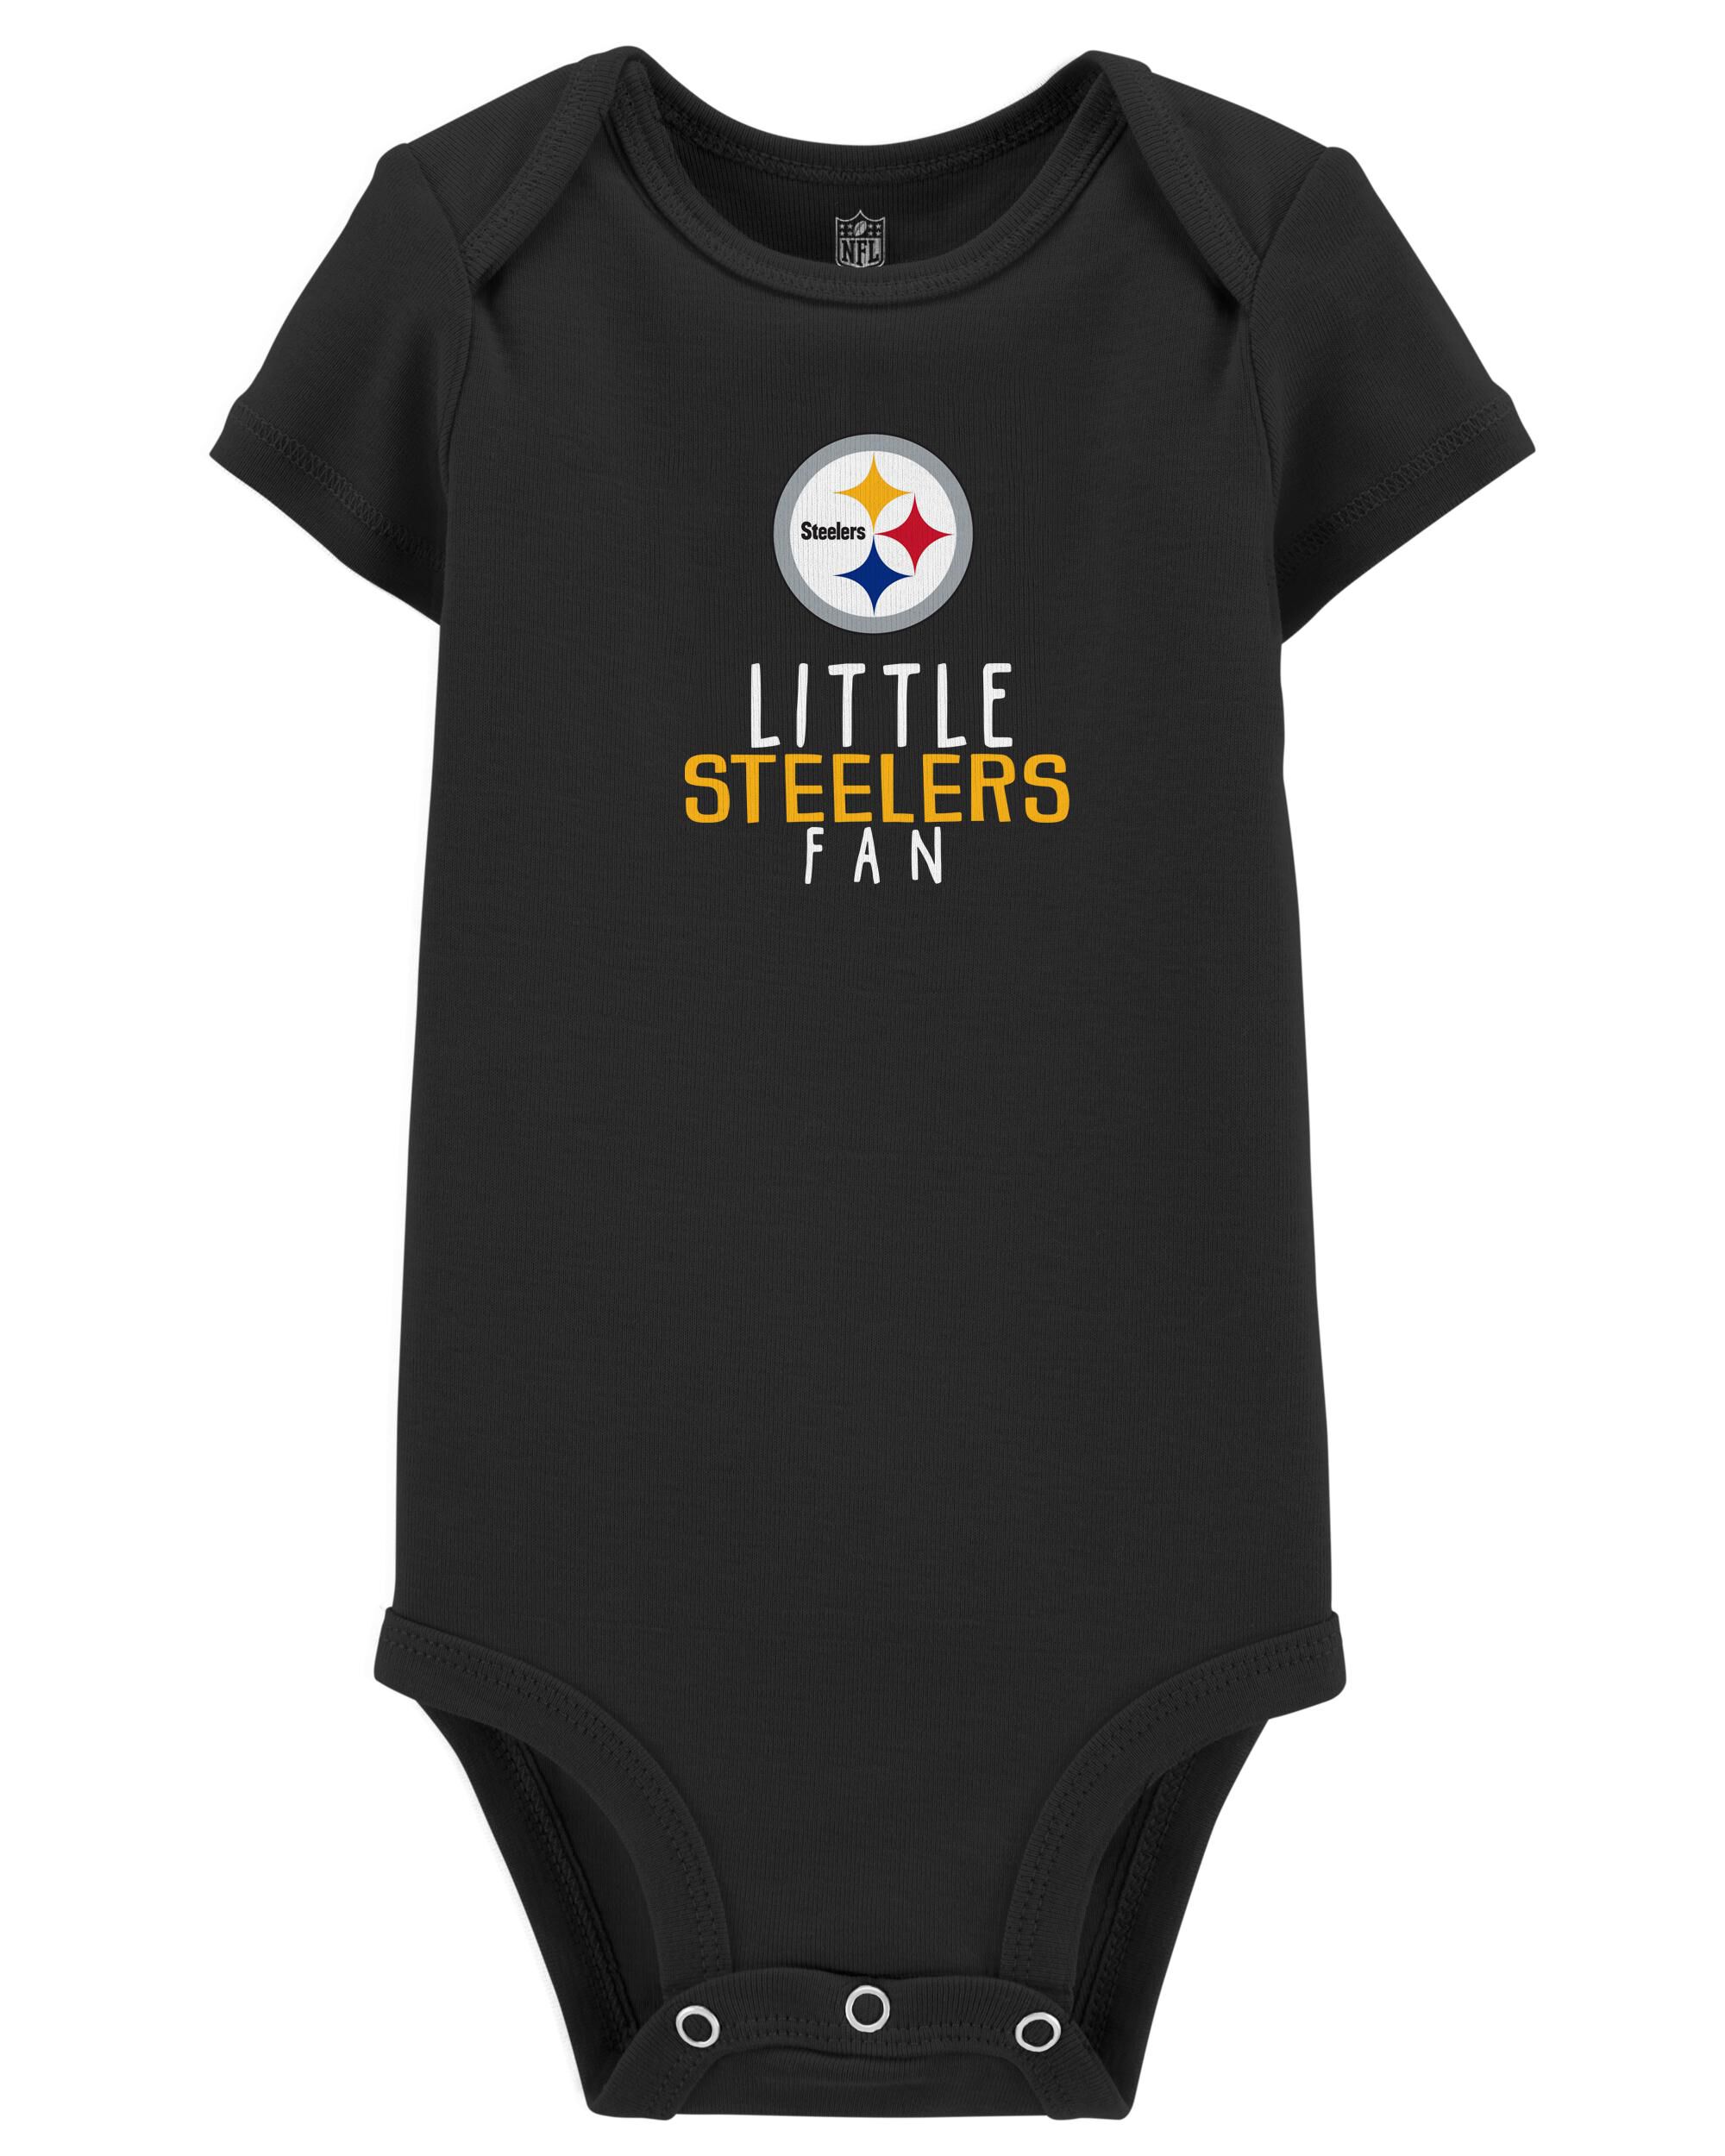 nfl pittsburgh steelers clothing